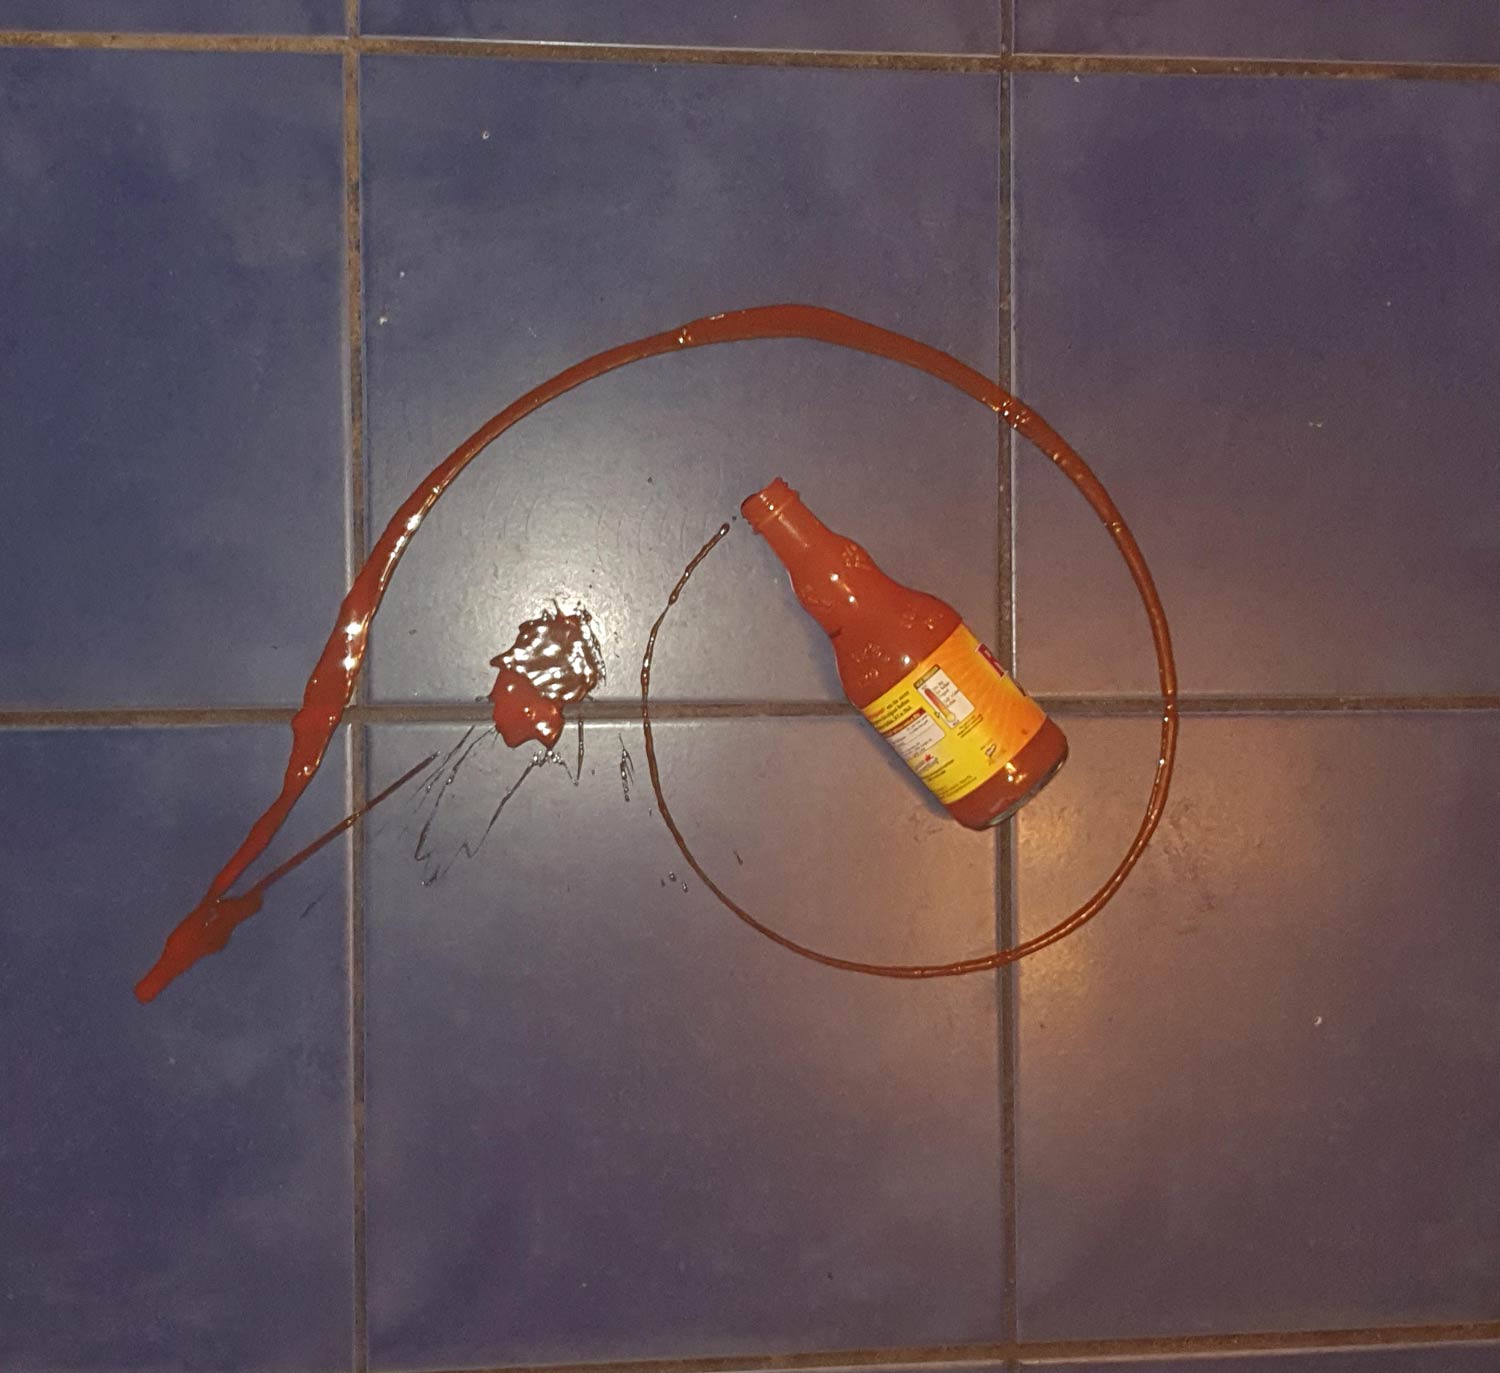 Dropped my bottle of Frank's hot sauce from the fridge and the spillage looks like the golden ratio. The universe is trying to tell me something